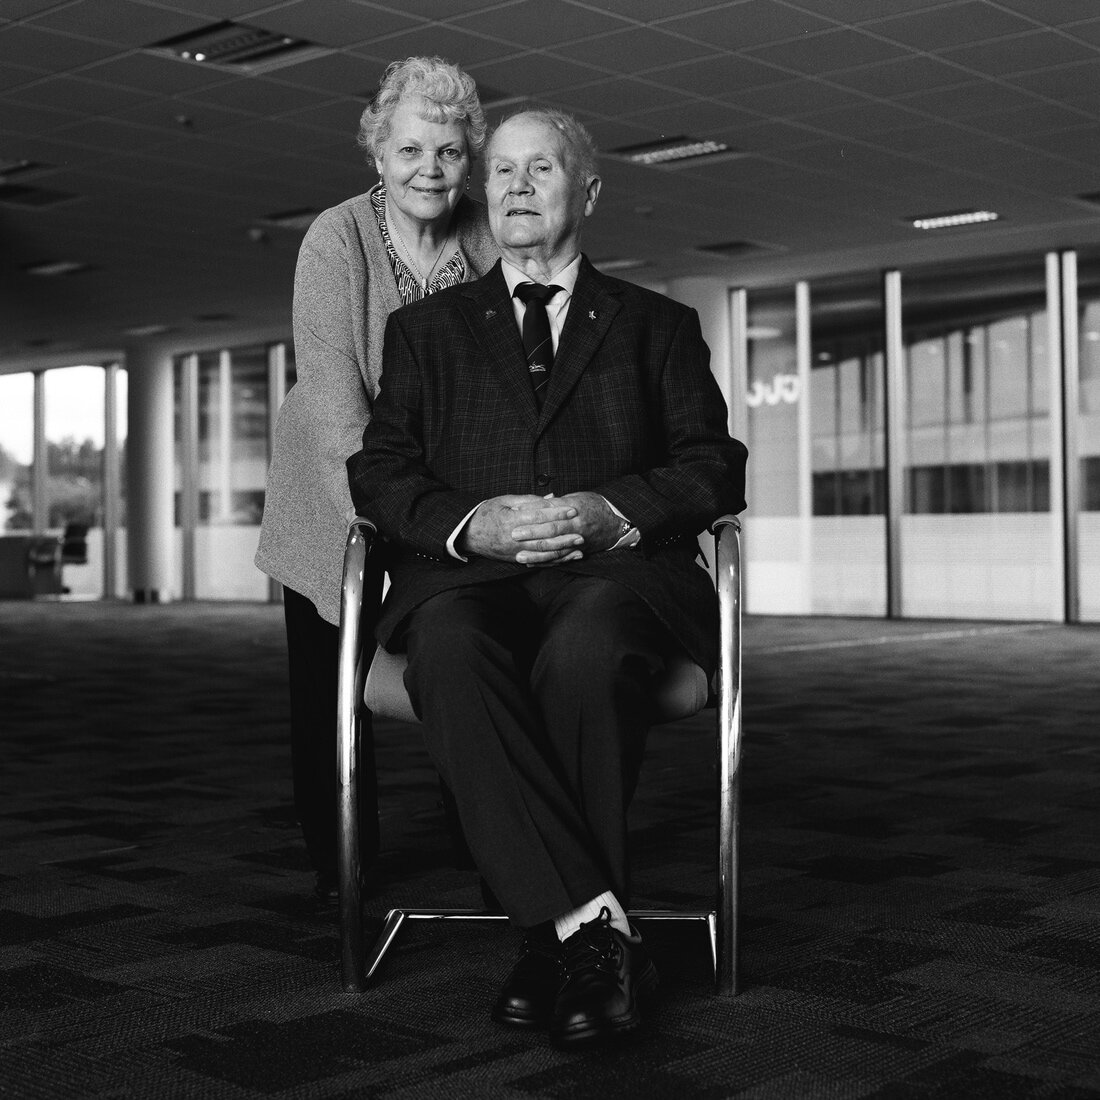 Stanley and Margaret Godwin, Coroners Court, Warrington, 07/10/2015. Stanley and Margaret lost their son Derick Godwin at the FA semi final, Hillsborough, 15/04/1989.